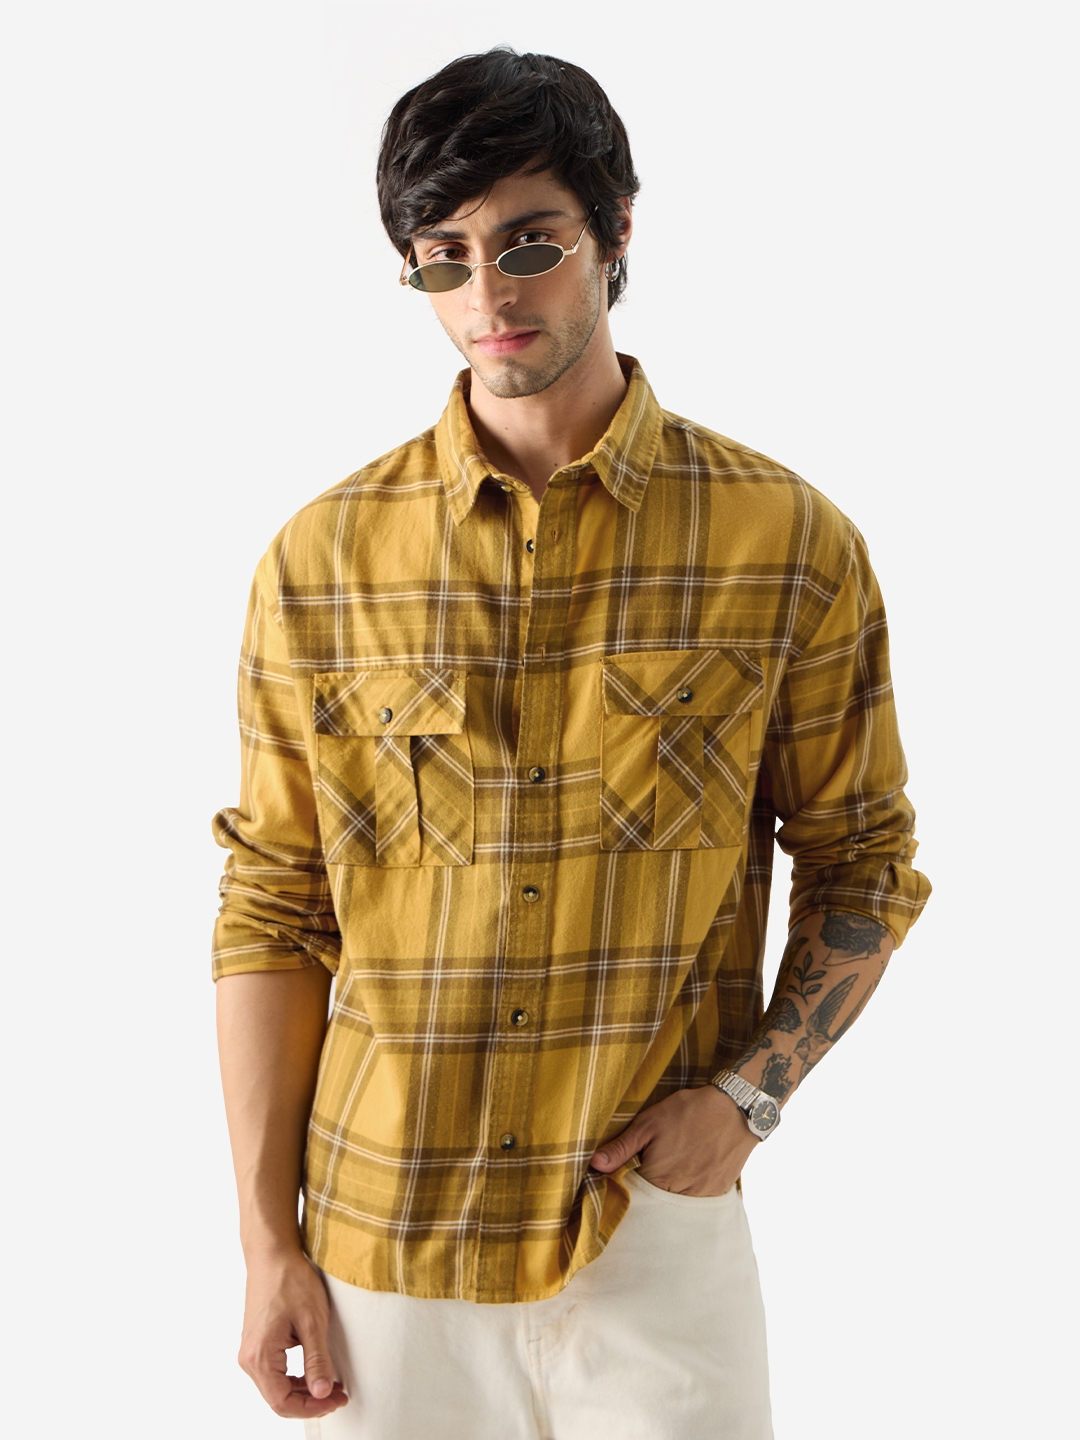 The Souled Store | Men's Plaid: Mustard, Black And White Men's Relaxed Shirts